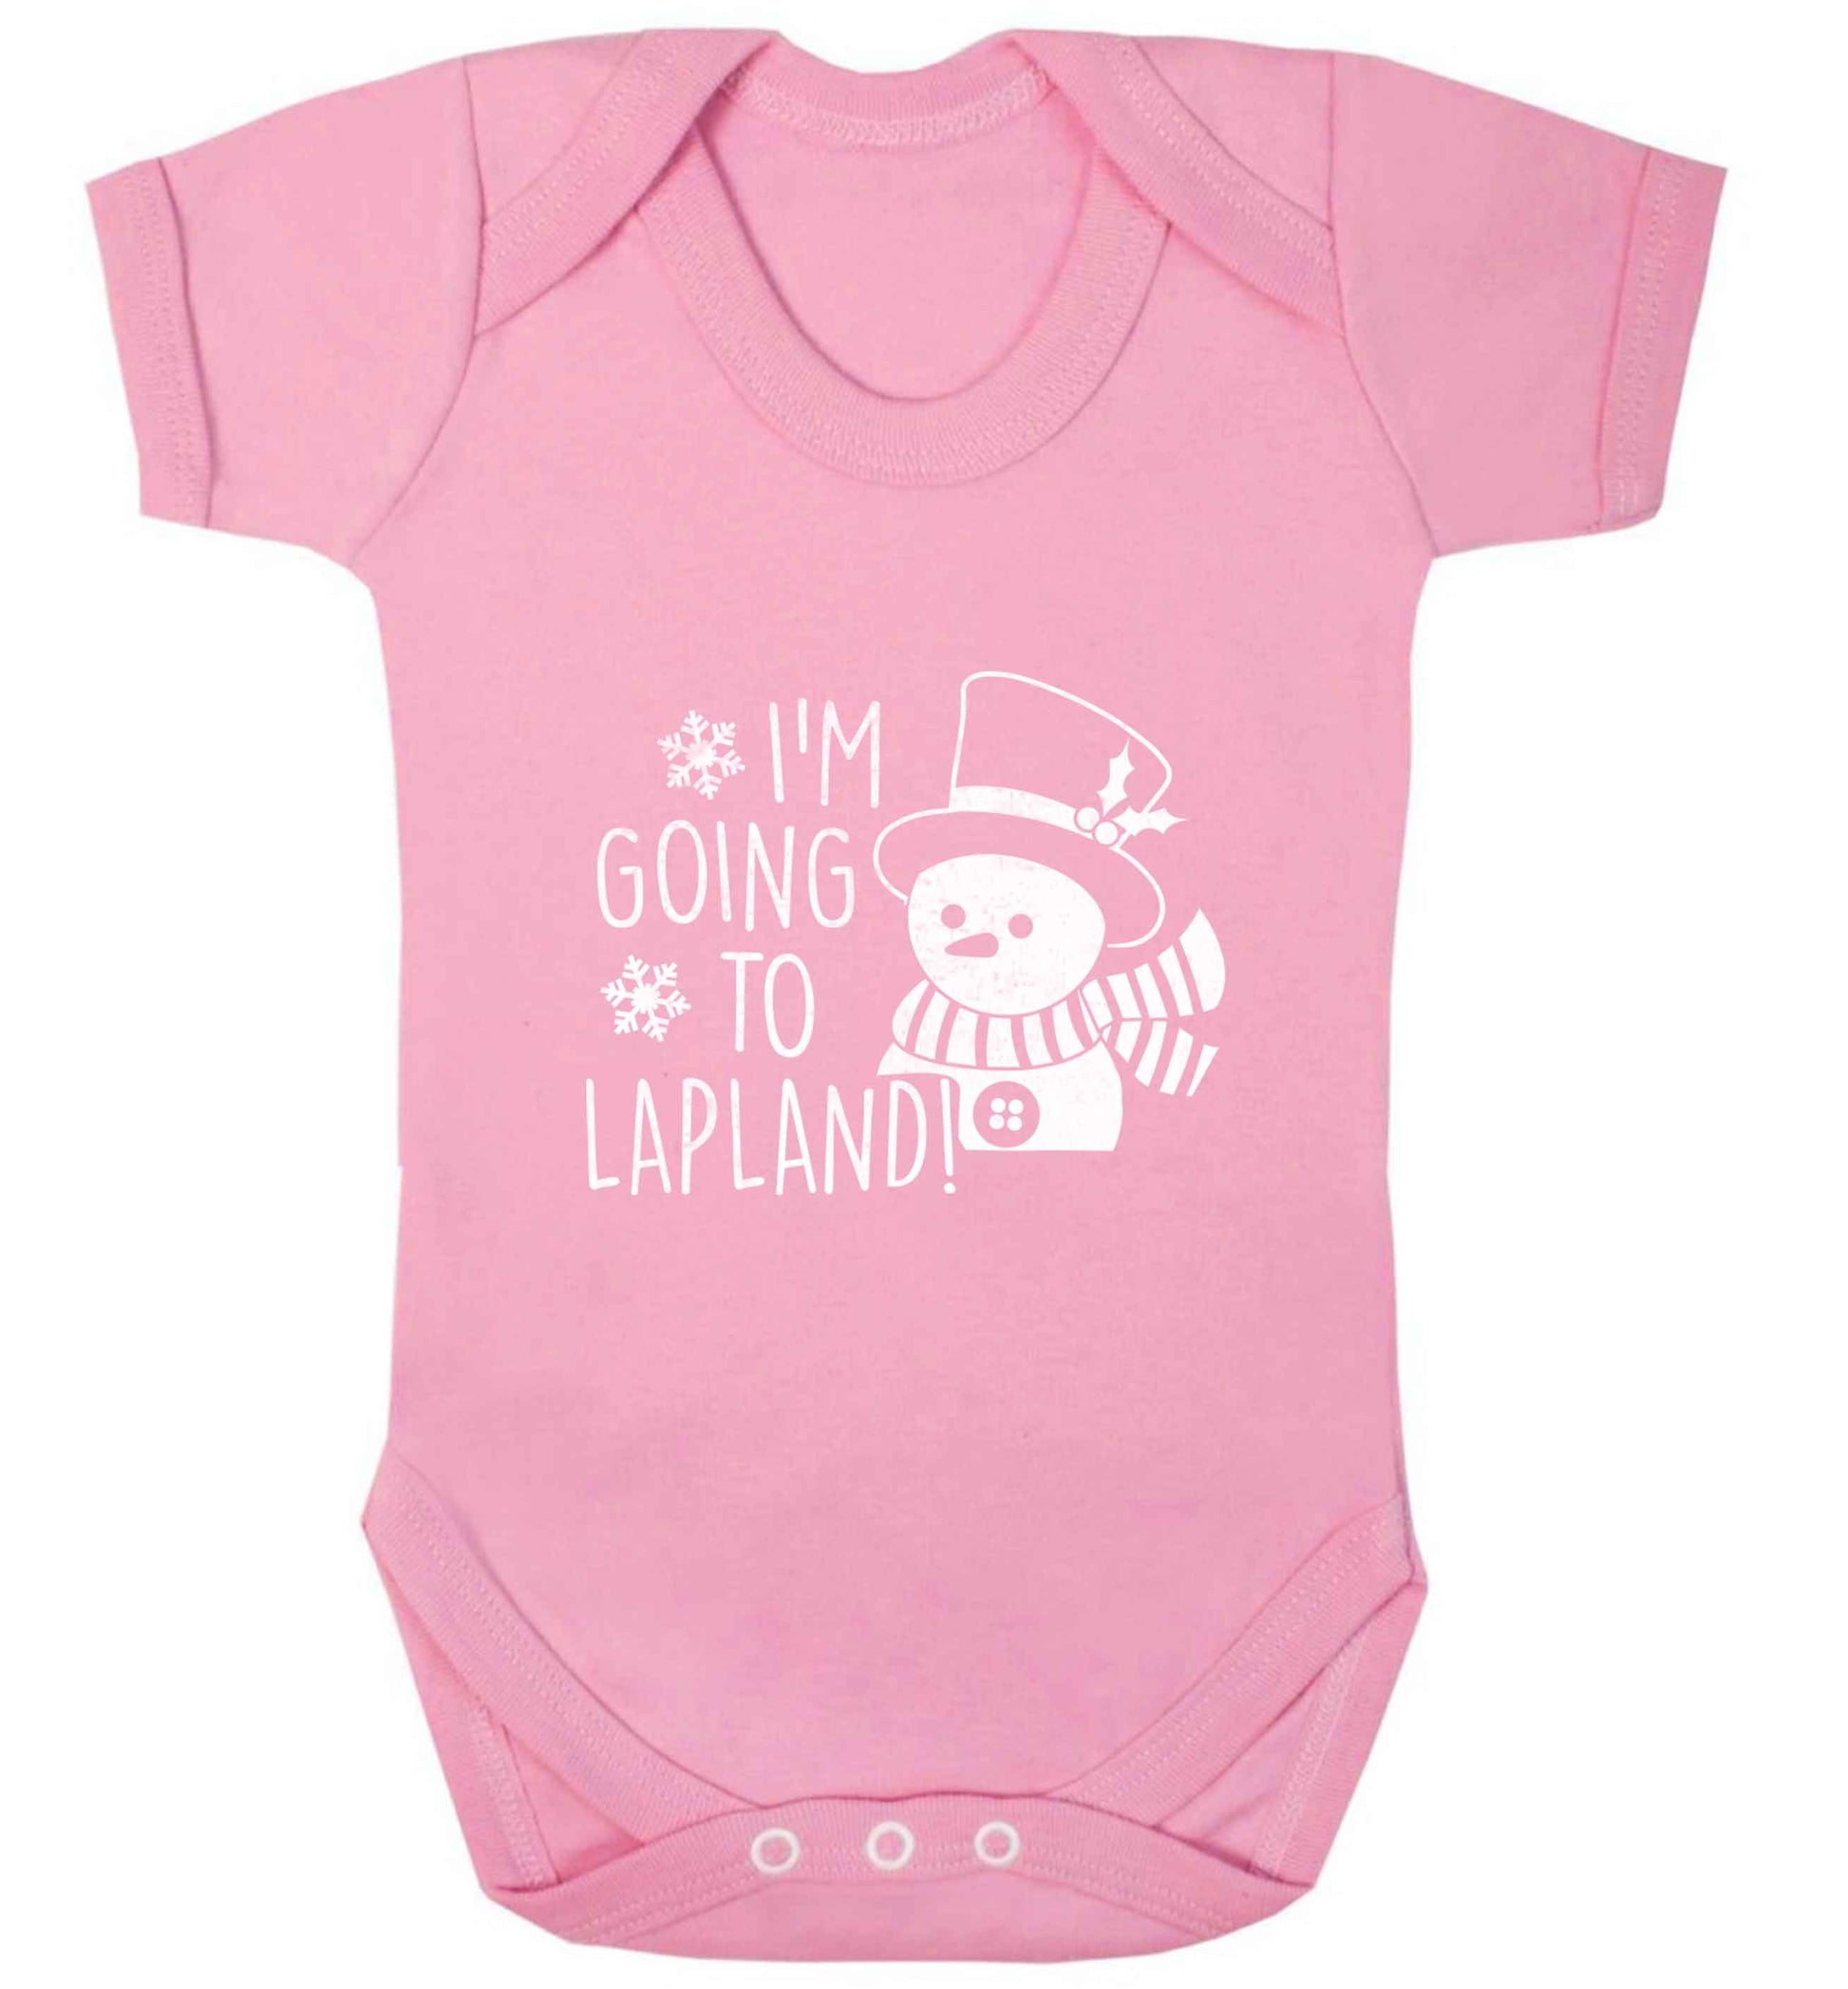 I'm going to Lapland baby vest pale pink 18-24 months